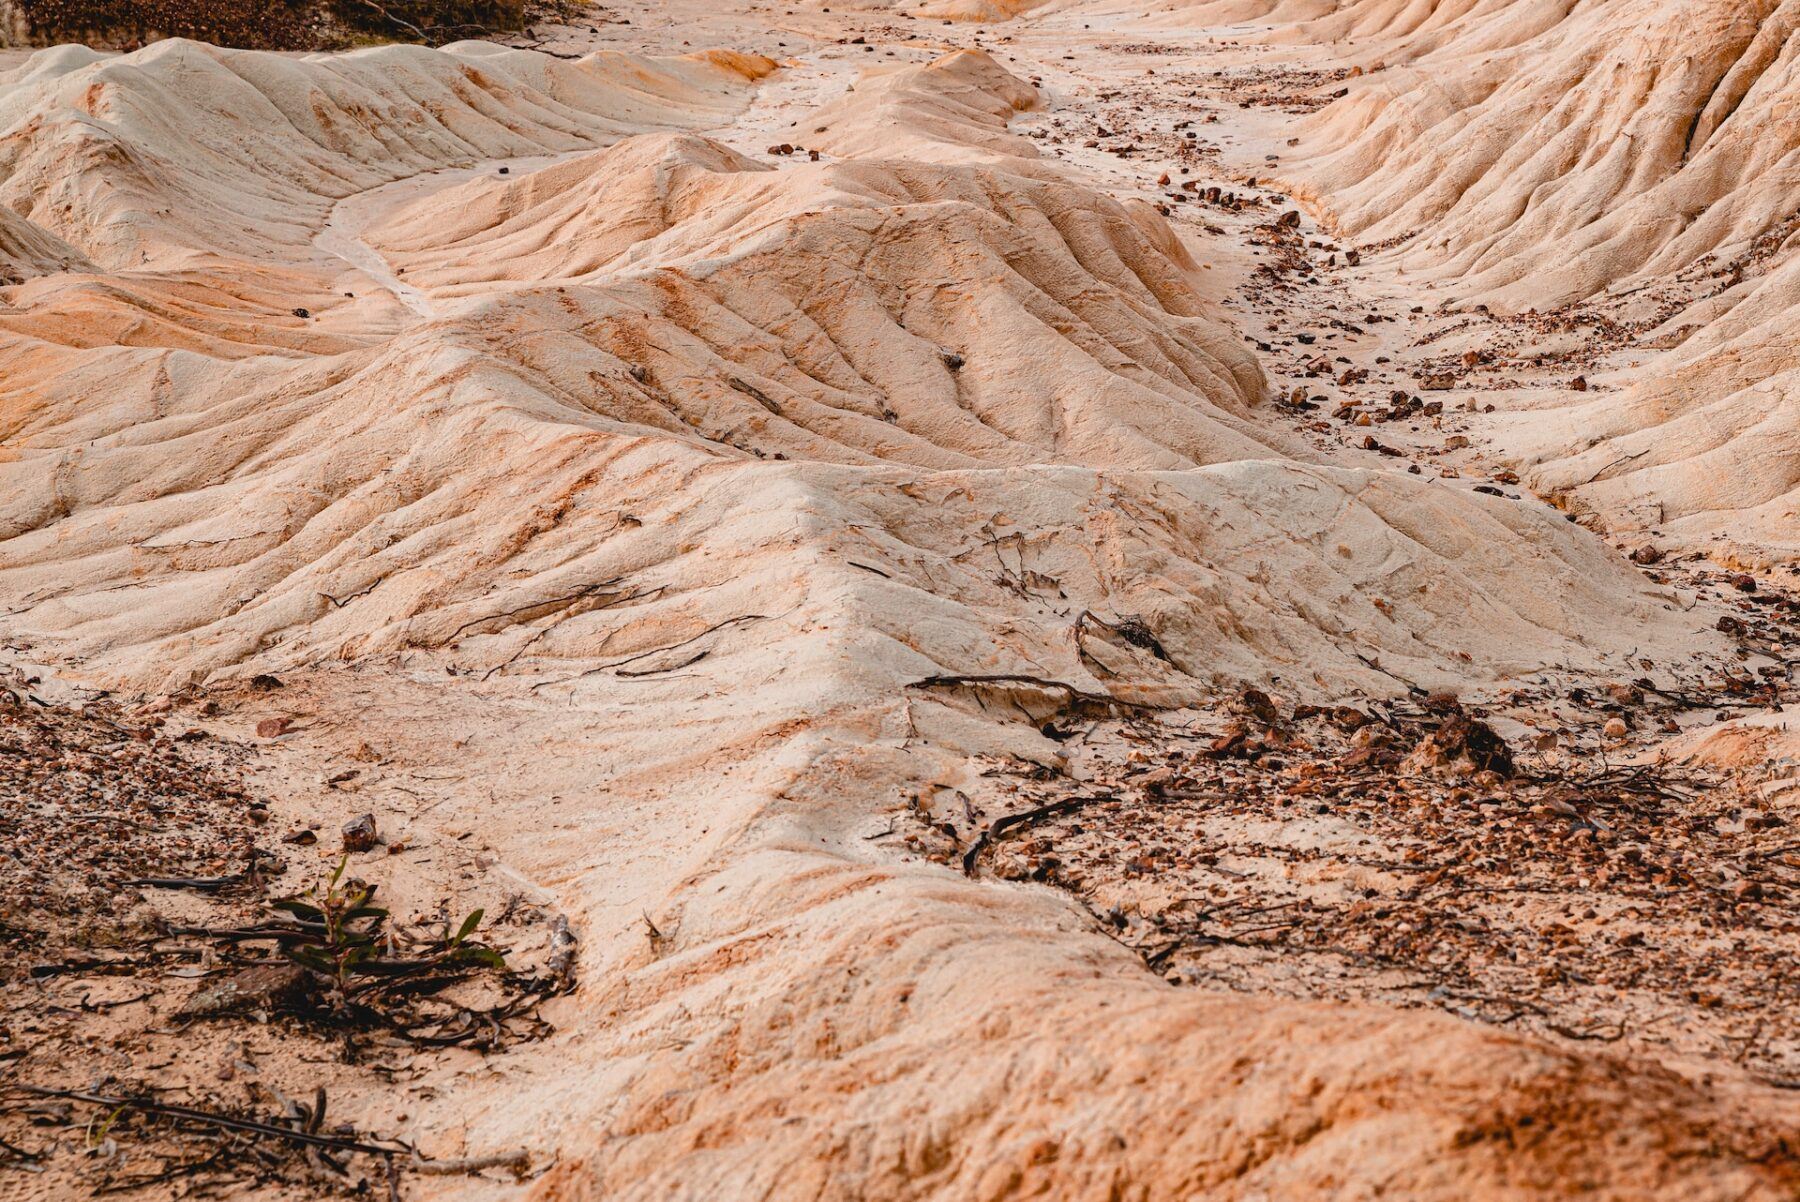 zoomed in image of a rugged desert landscape with sandy tones and differently elevated areas